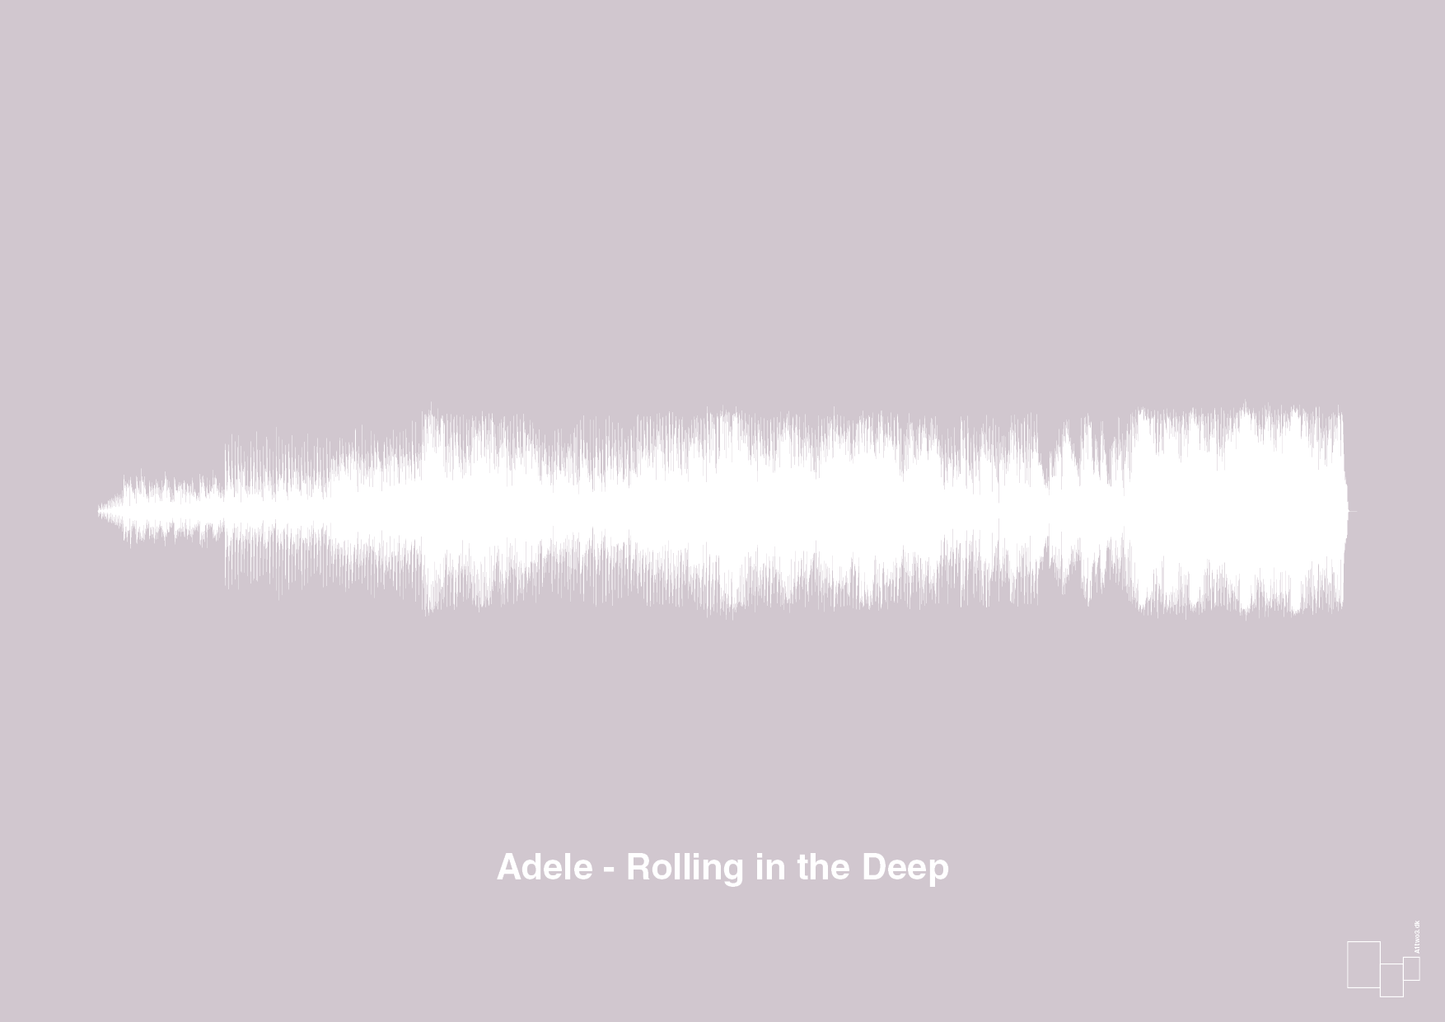 adele - rolling in the deep - Plakat med Musik i Dusty Lilac